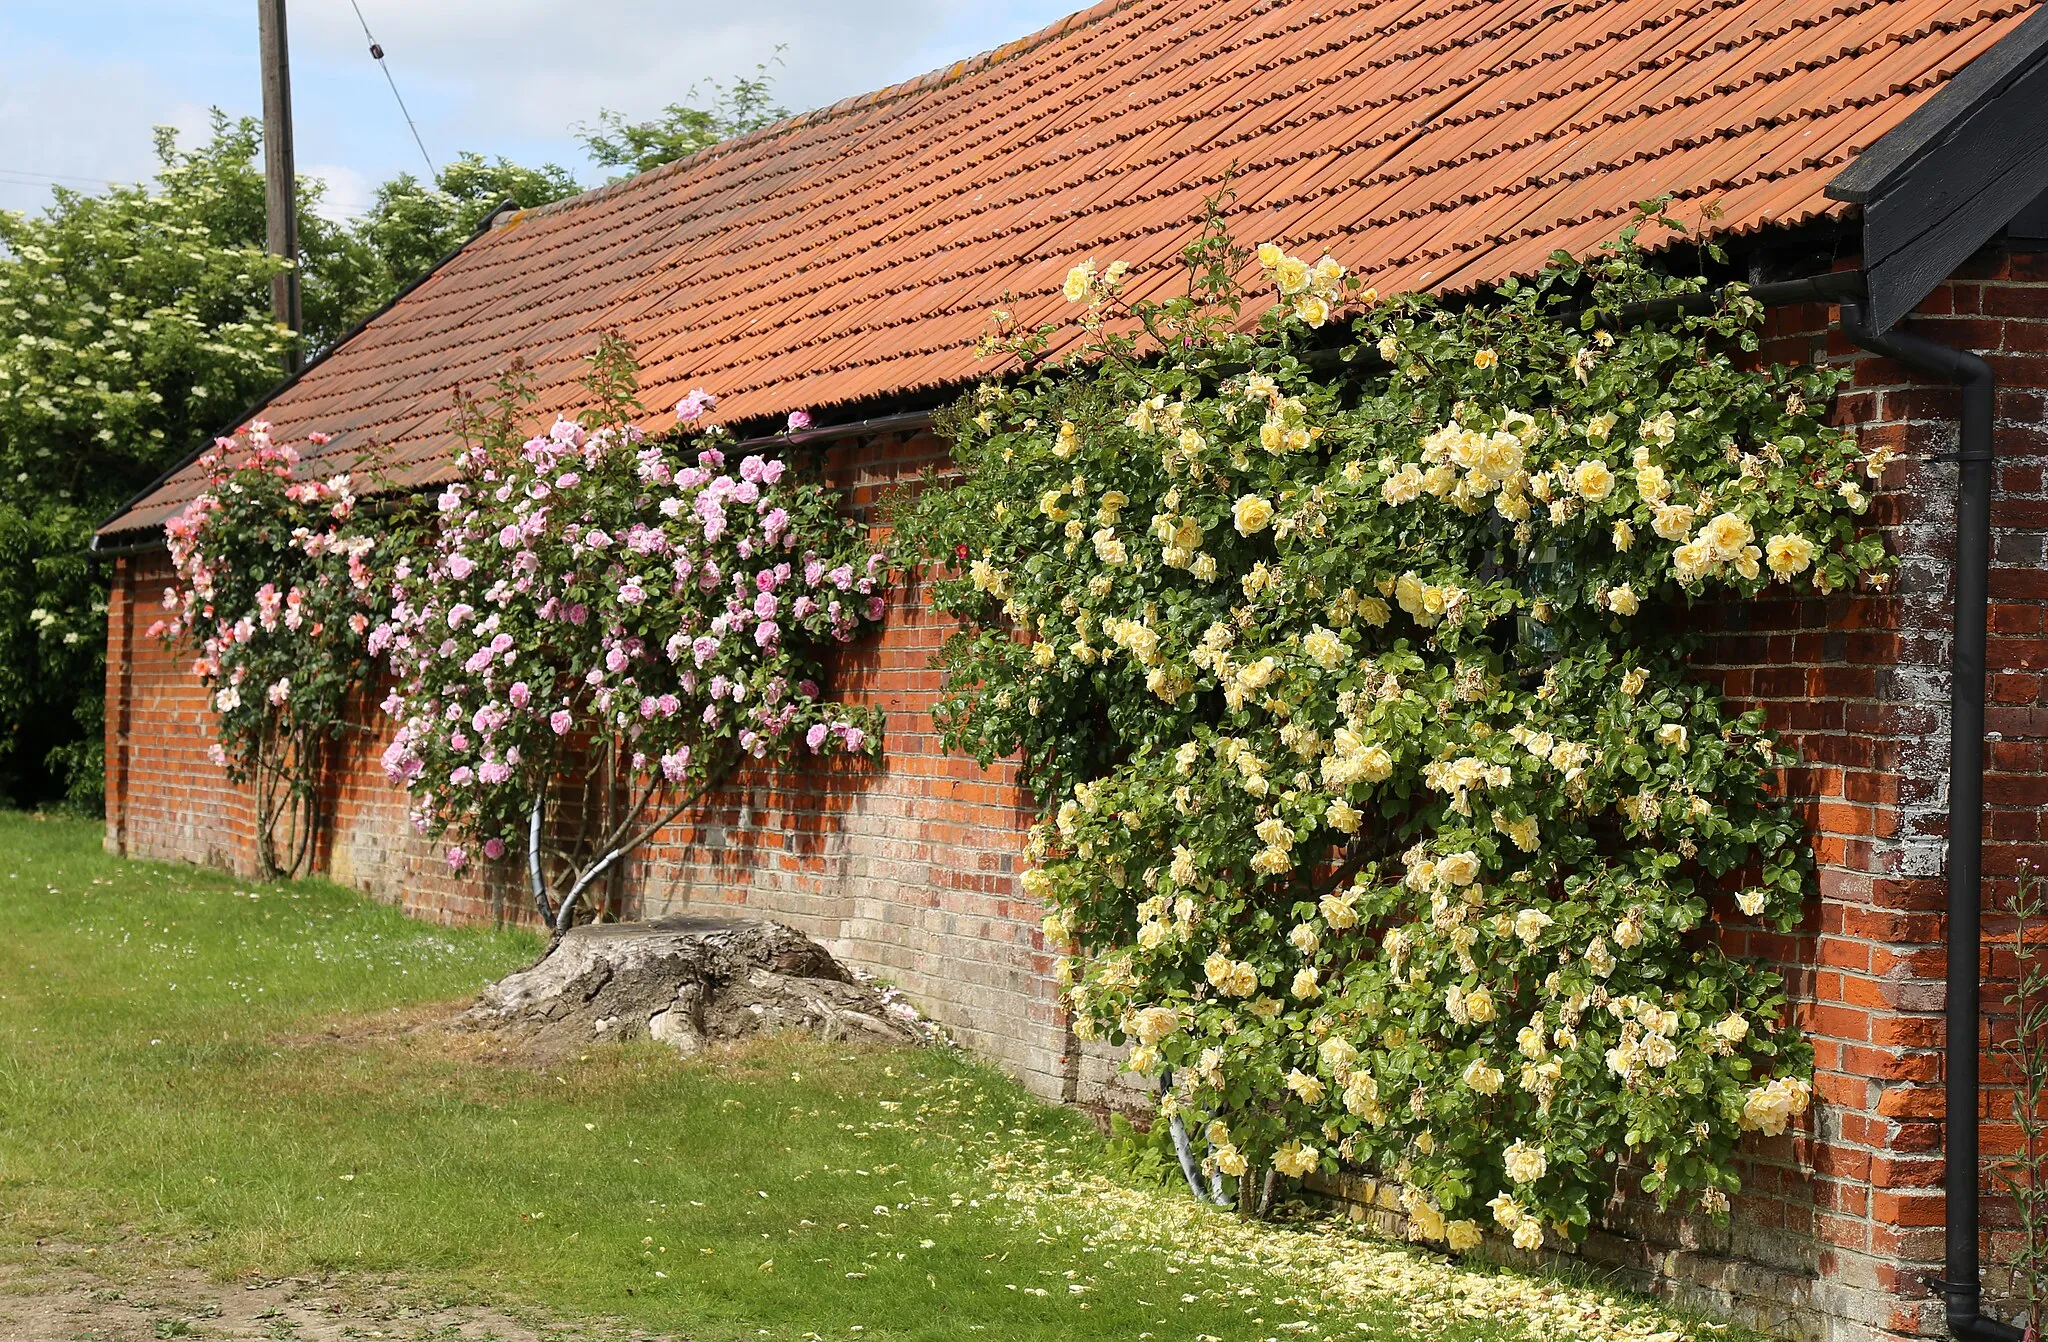 Photo showing: Tiled-roof and brick barn with trained climbing roses at Mashbury, Essex, England